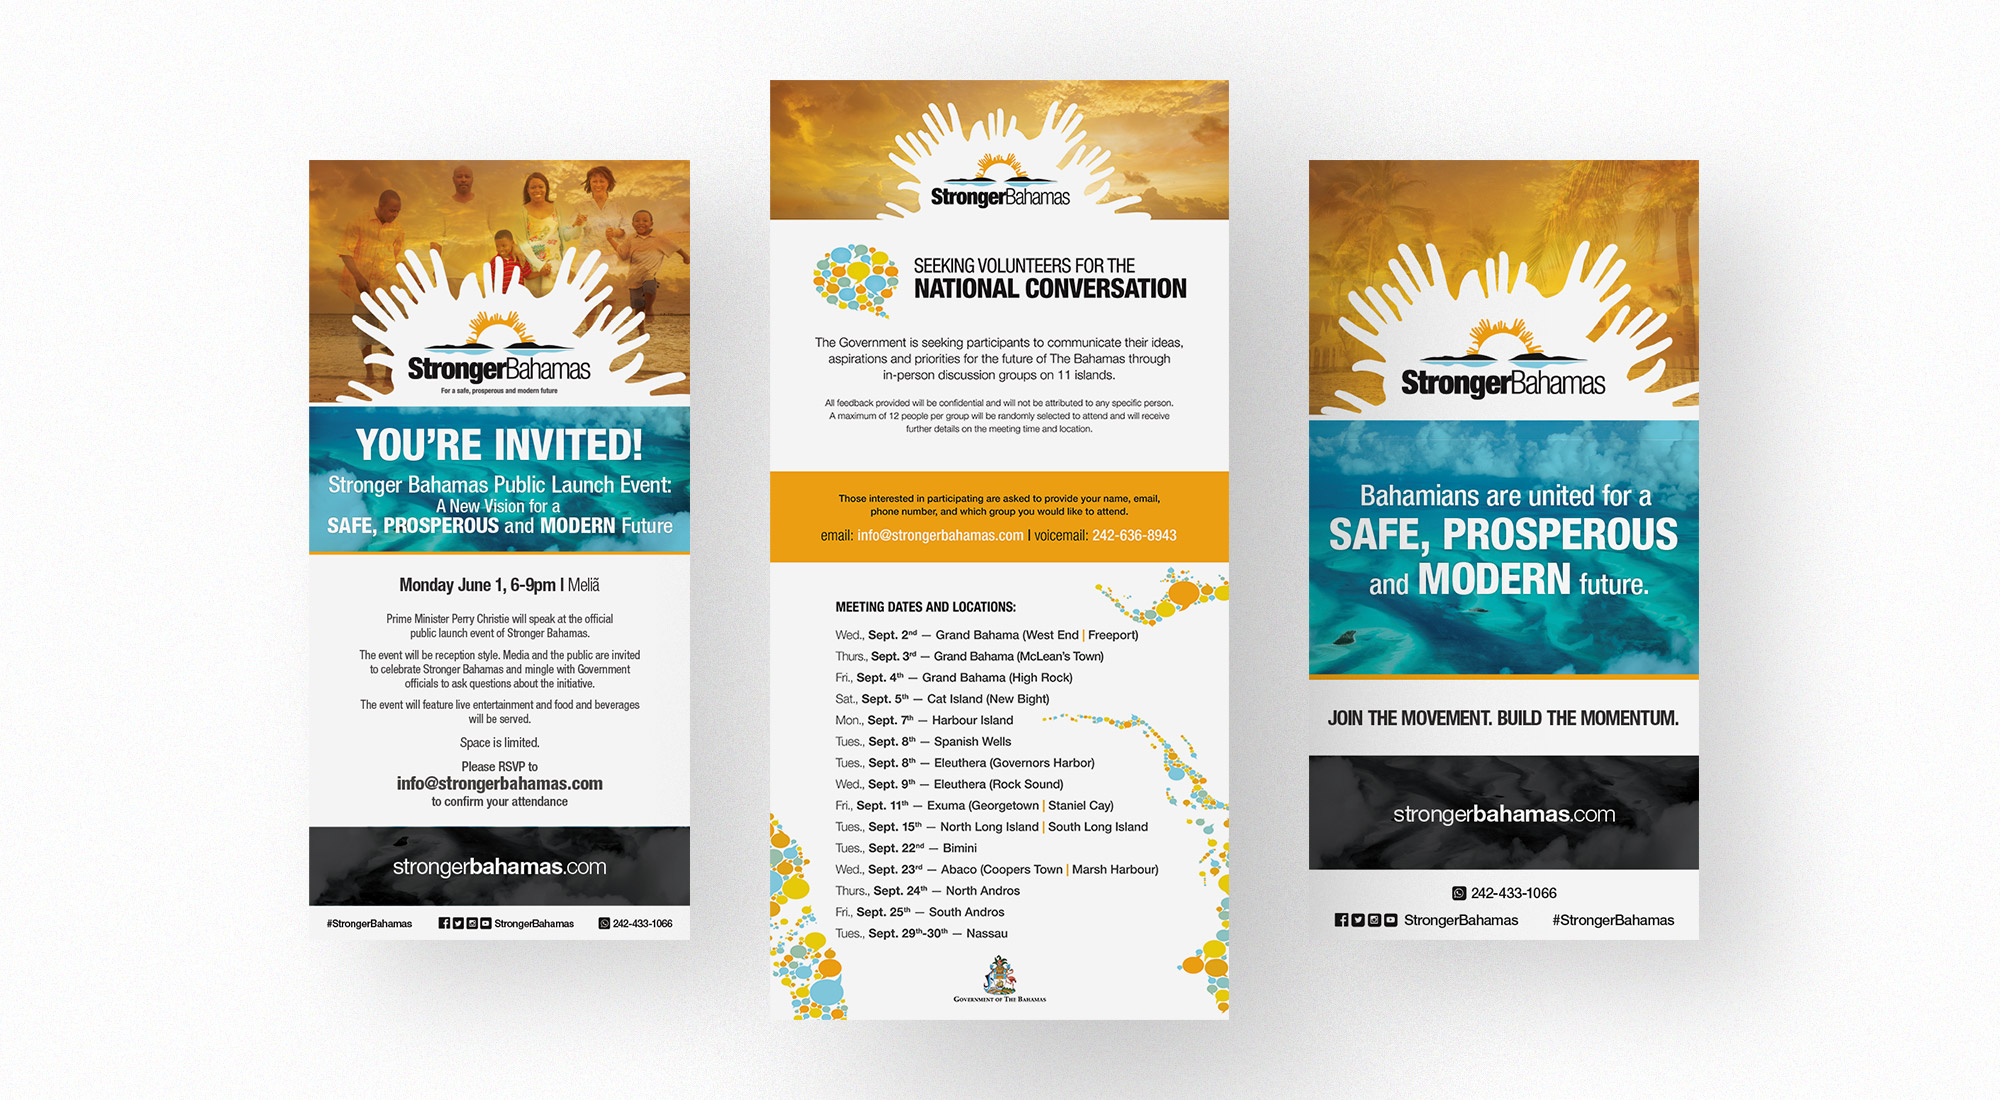 Stronger Bahamas Newspaper Ads for the Initiative Launch and National Conversation